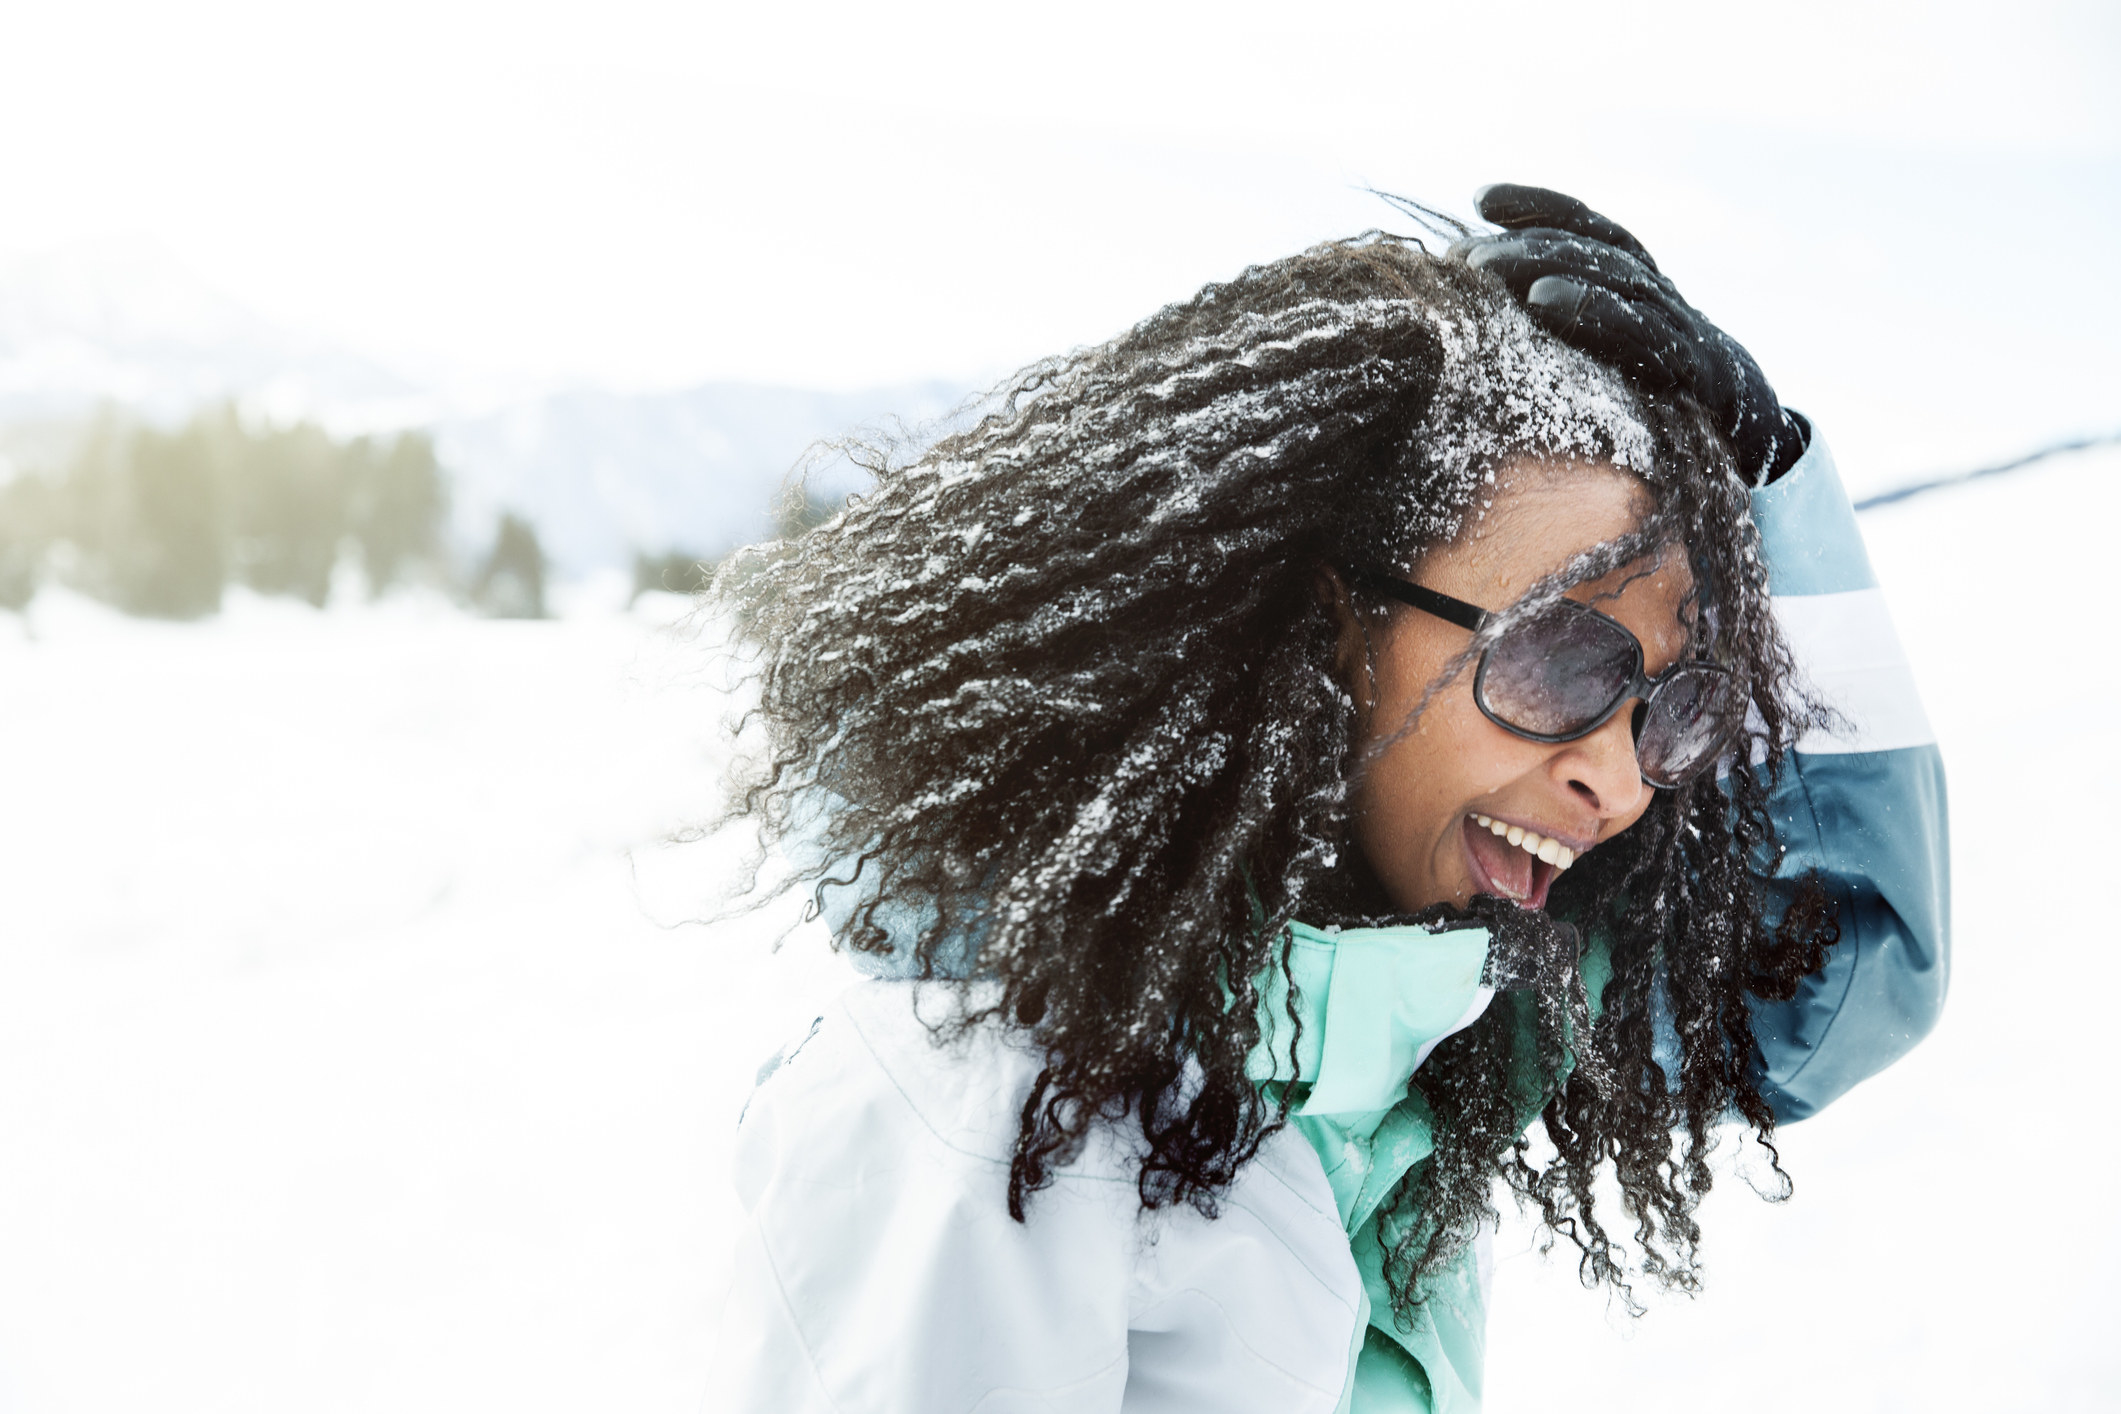 Woman wearing sunglasses holds down hair that blows in snowy wind